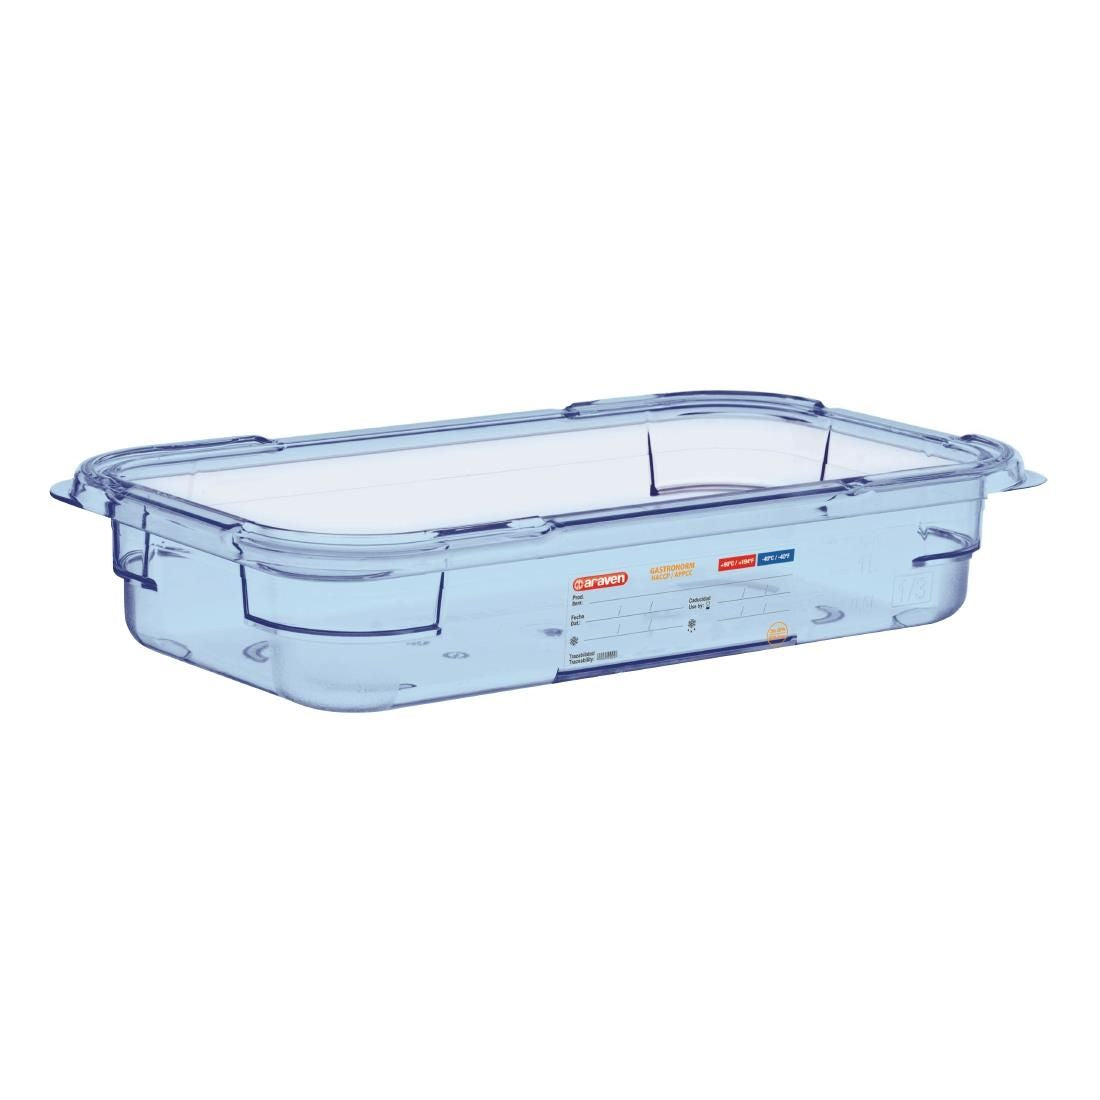 GP578 Araven ABS Food Storage Container Blue GN 1/3 65mm JD Catering Equipment Solutions Ltd